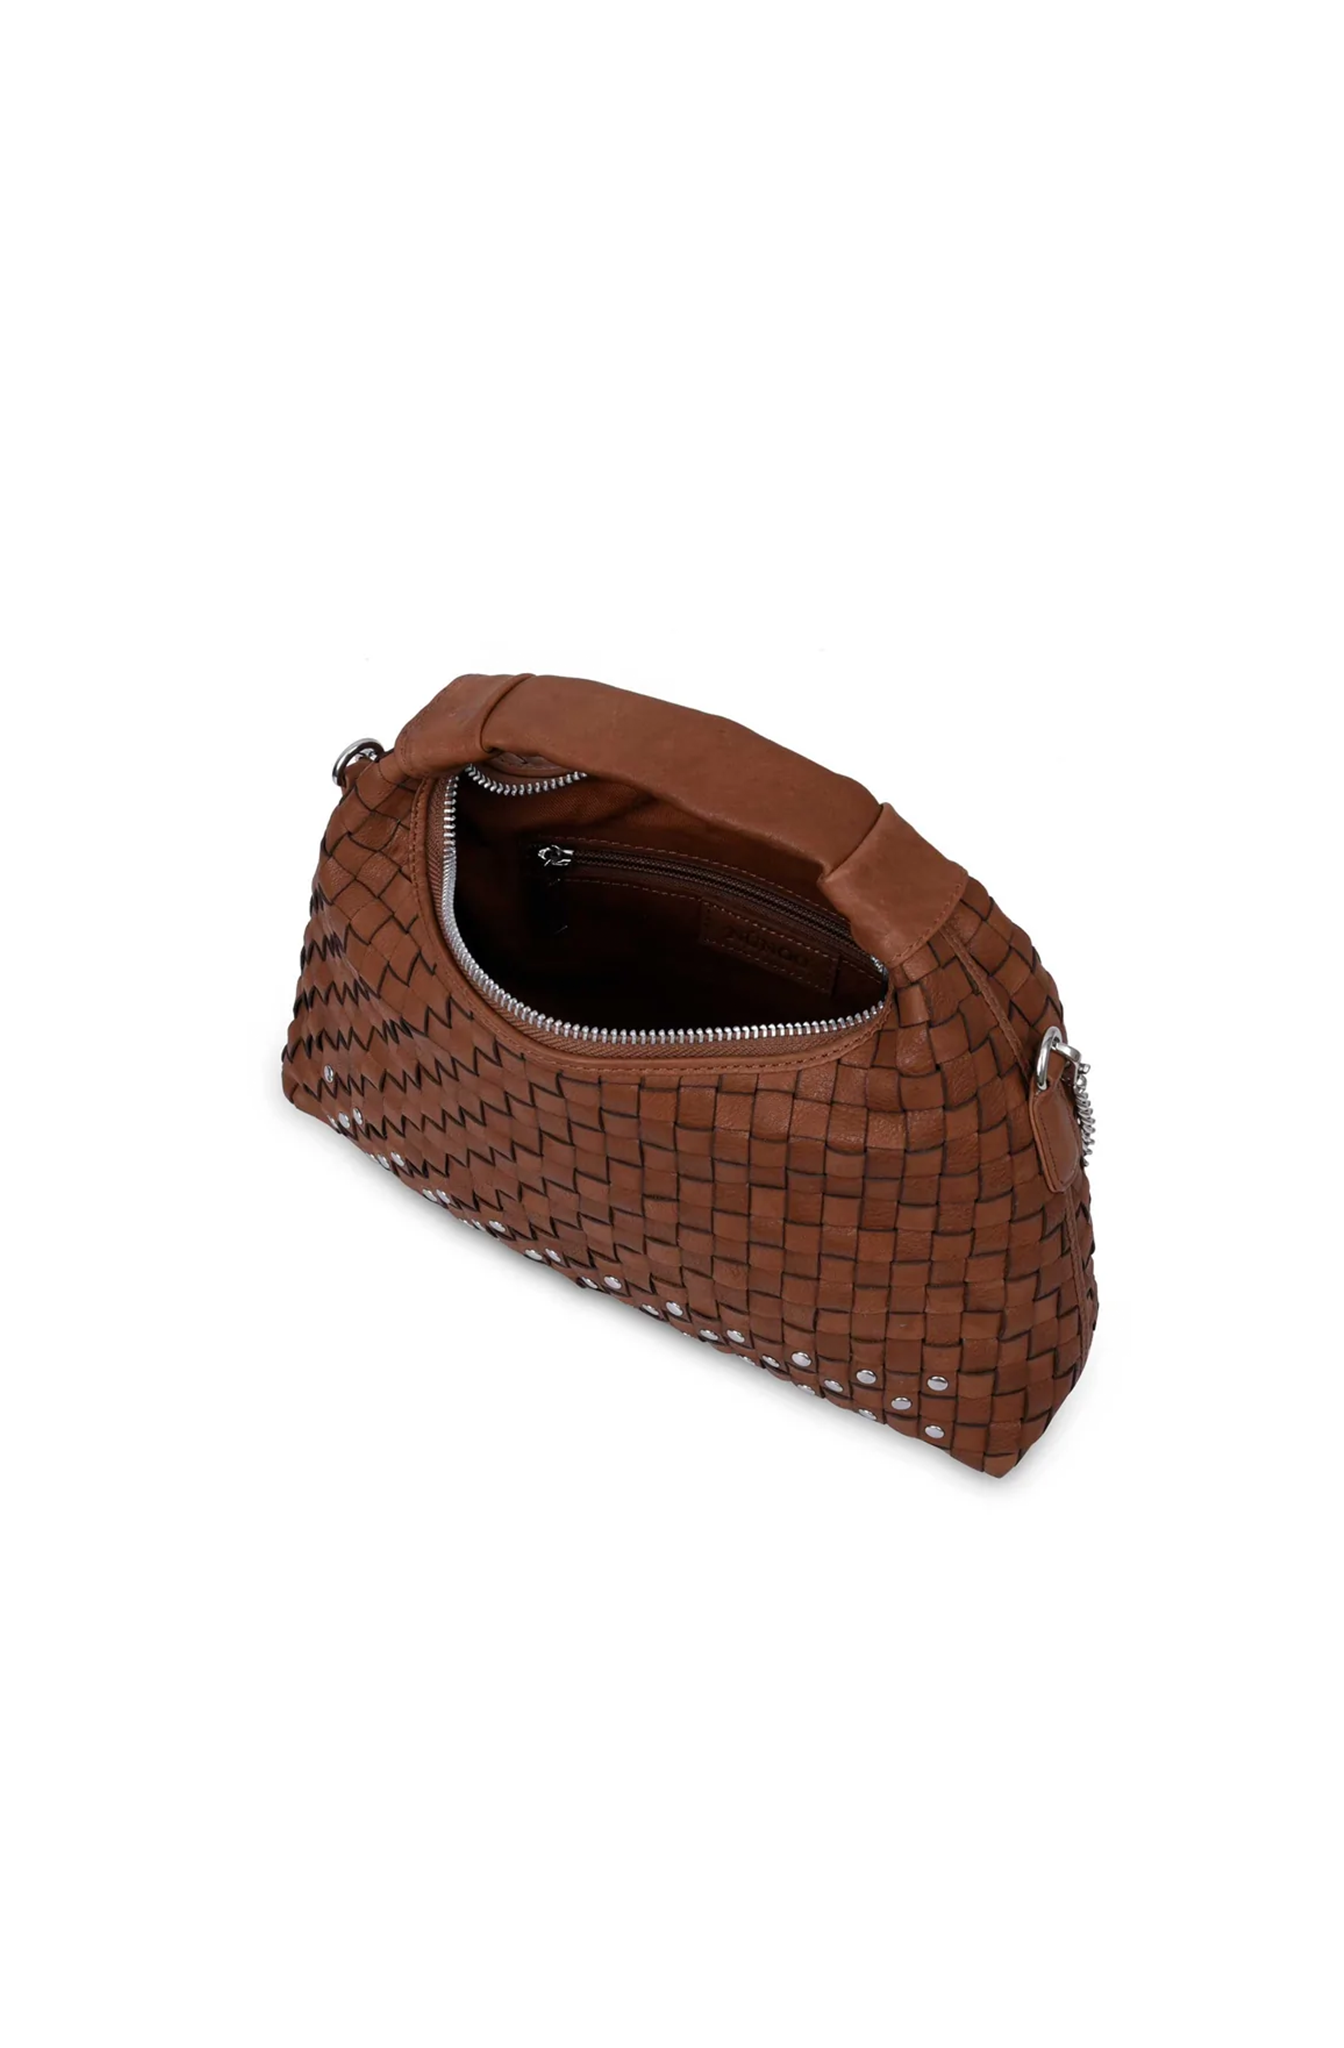 This Nunoo maxi dandy brown bag has one main compartment with a zip closure, as well as an inner pocket with a zip closure. A chain is included with the bag.